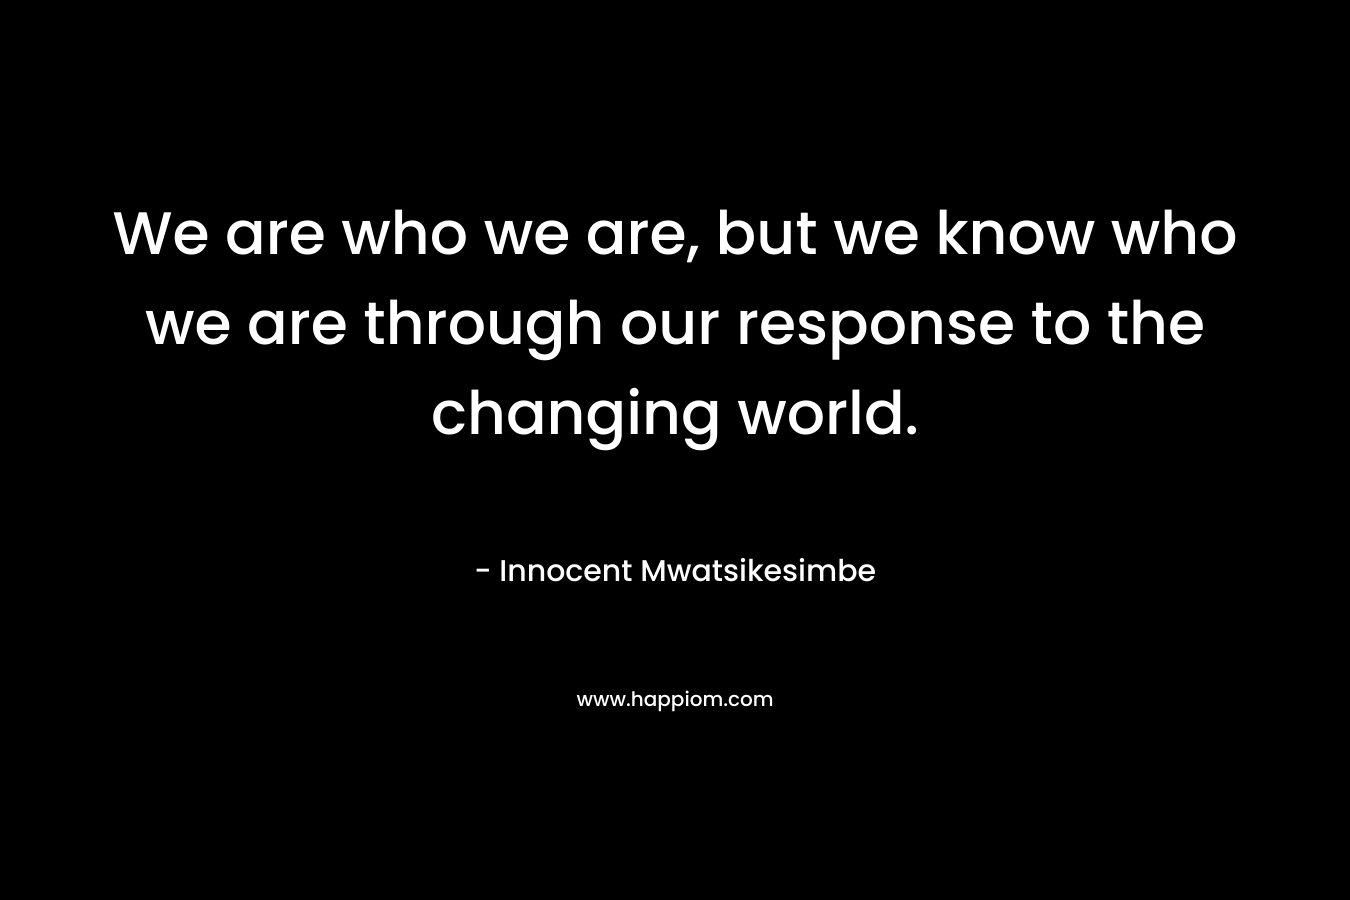 We are who we are, but we know who we are through our response to the changing world.